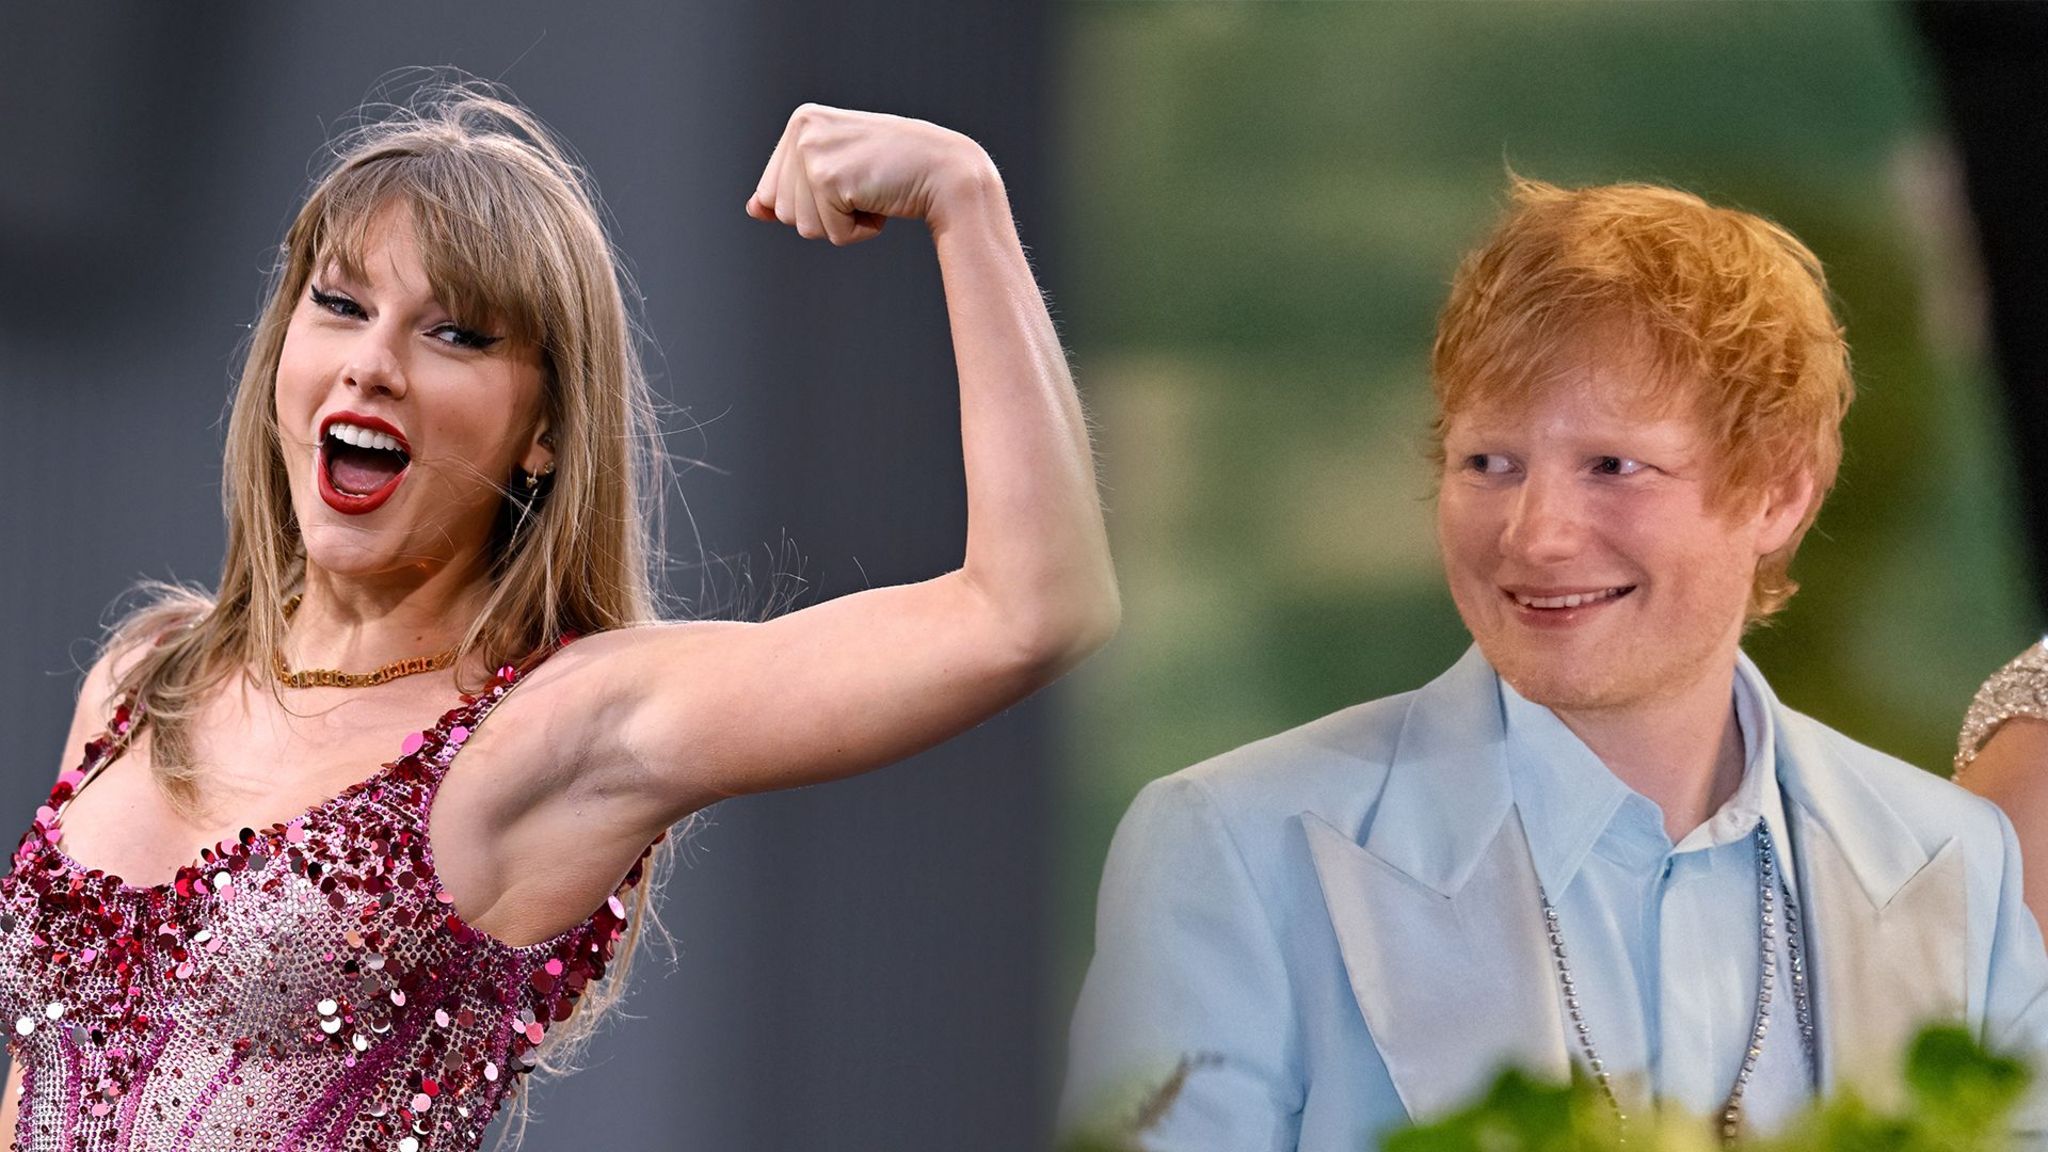 A combined image with Taylor Swift flexing her muscles and Ed Sheeran smiling